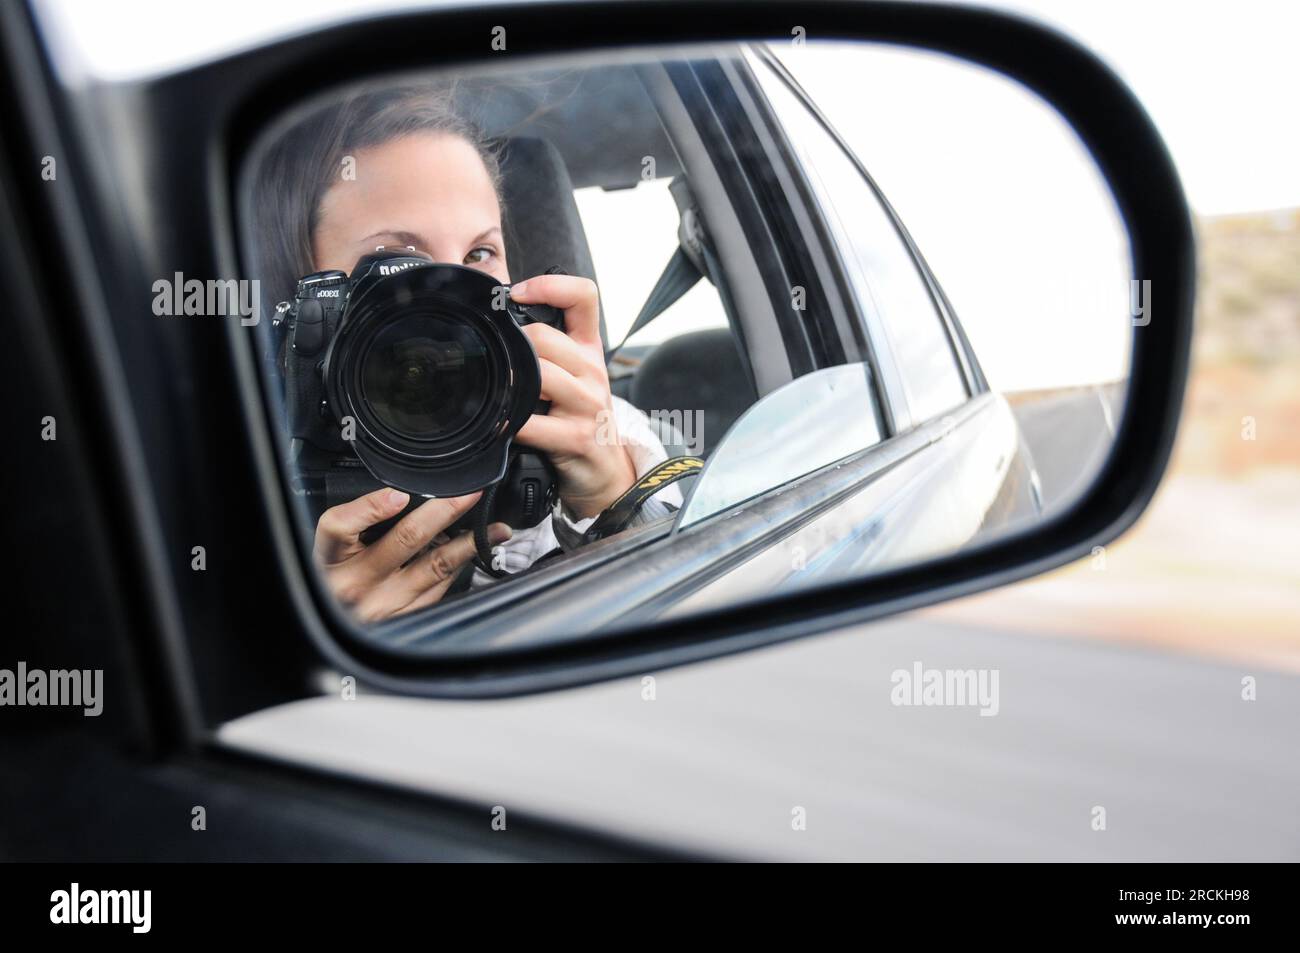 Self-portrait of girl in car mirror on a road trip through the American midwest Stock Photo